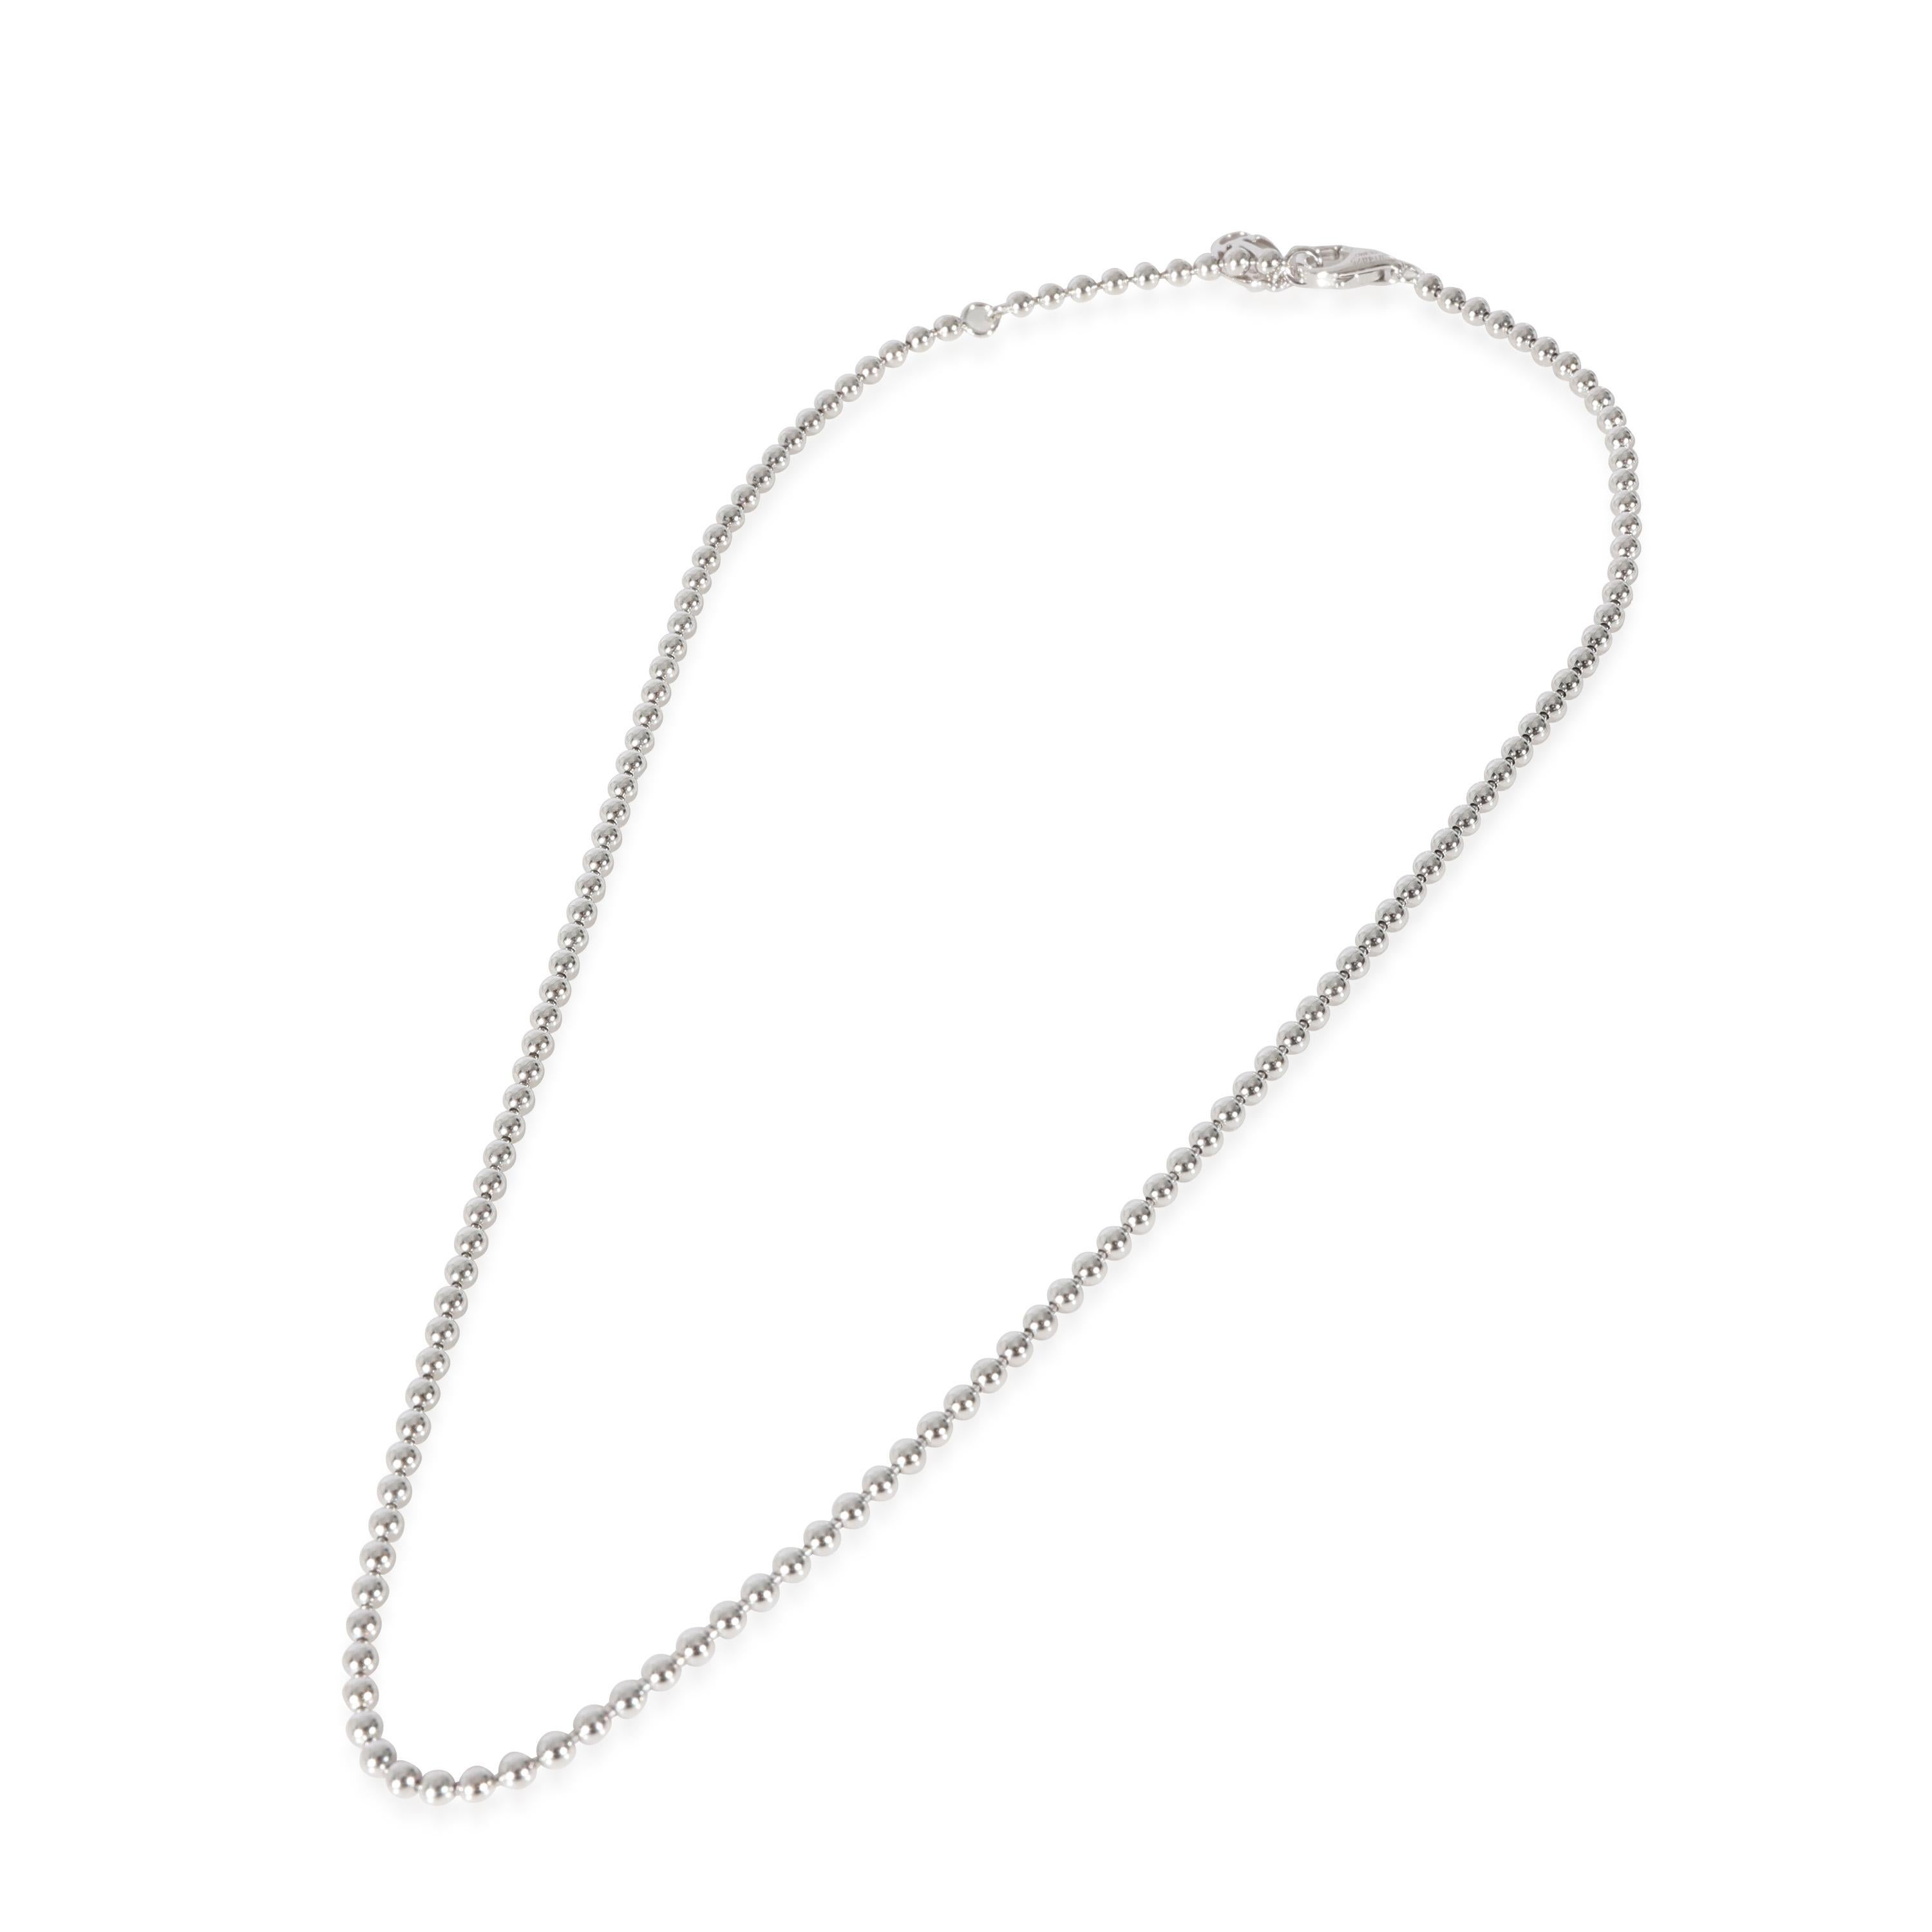 Cartier Bead Chain Necklace in 18k White Gold
 
 PRIMARY DETAILS
 SKU: 128213
 Listing Title: Cartier Bead Chain Necklace in 18k White Gold
 Condition Description: Translating to 'just a nail', the Juste Un Clou collection from Cartier is one of the